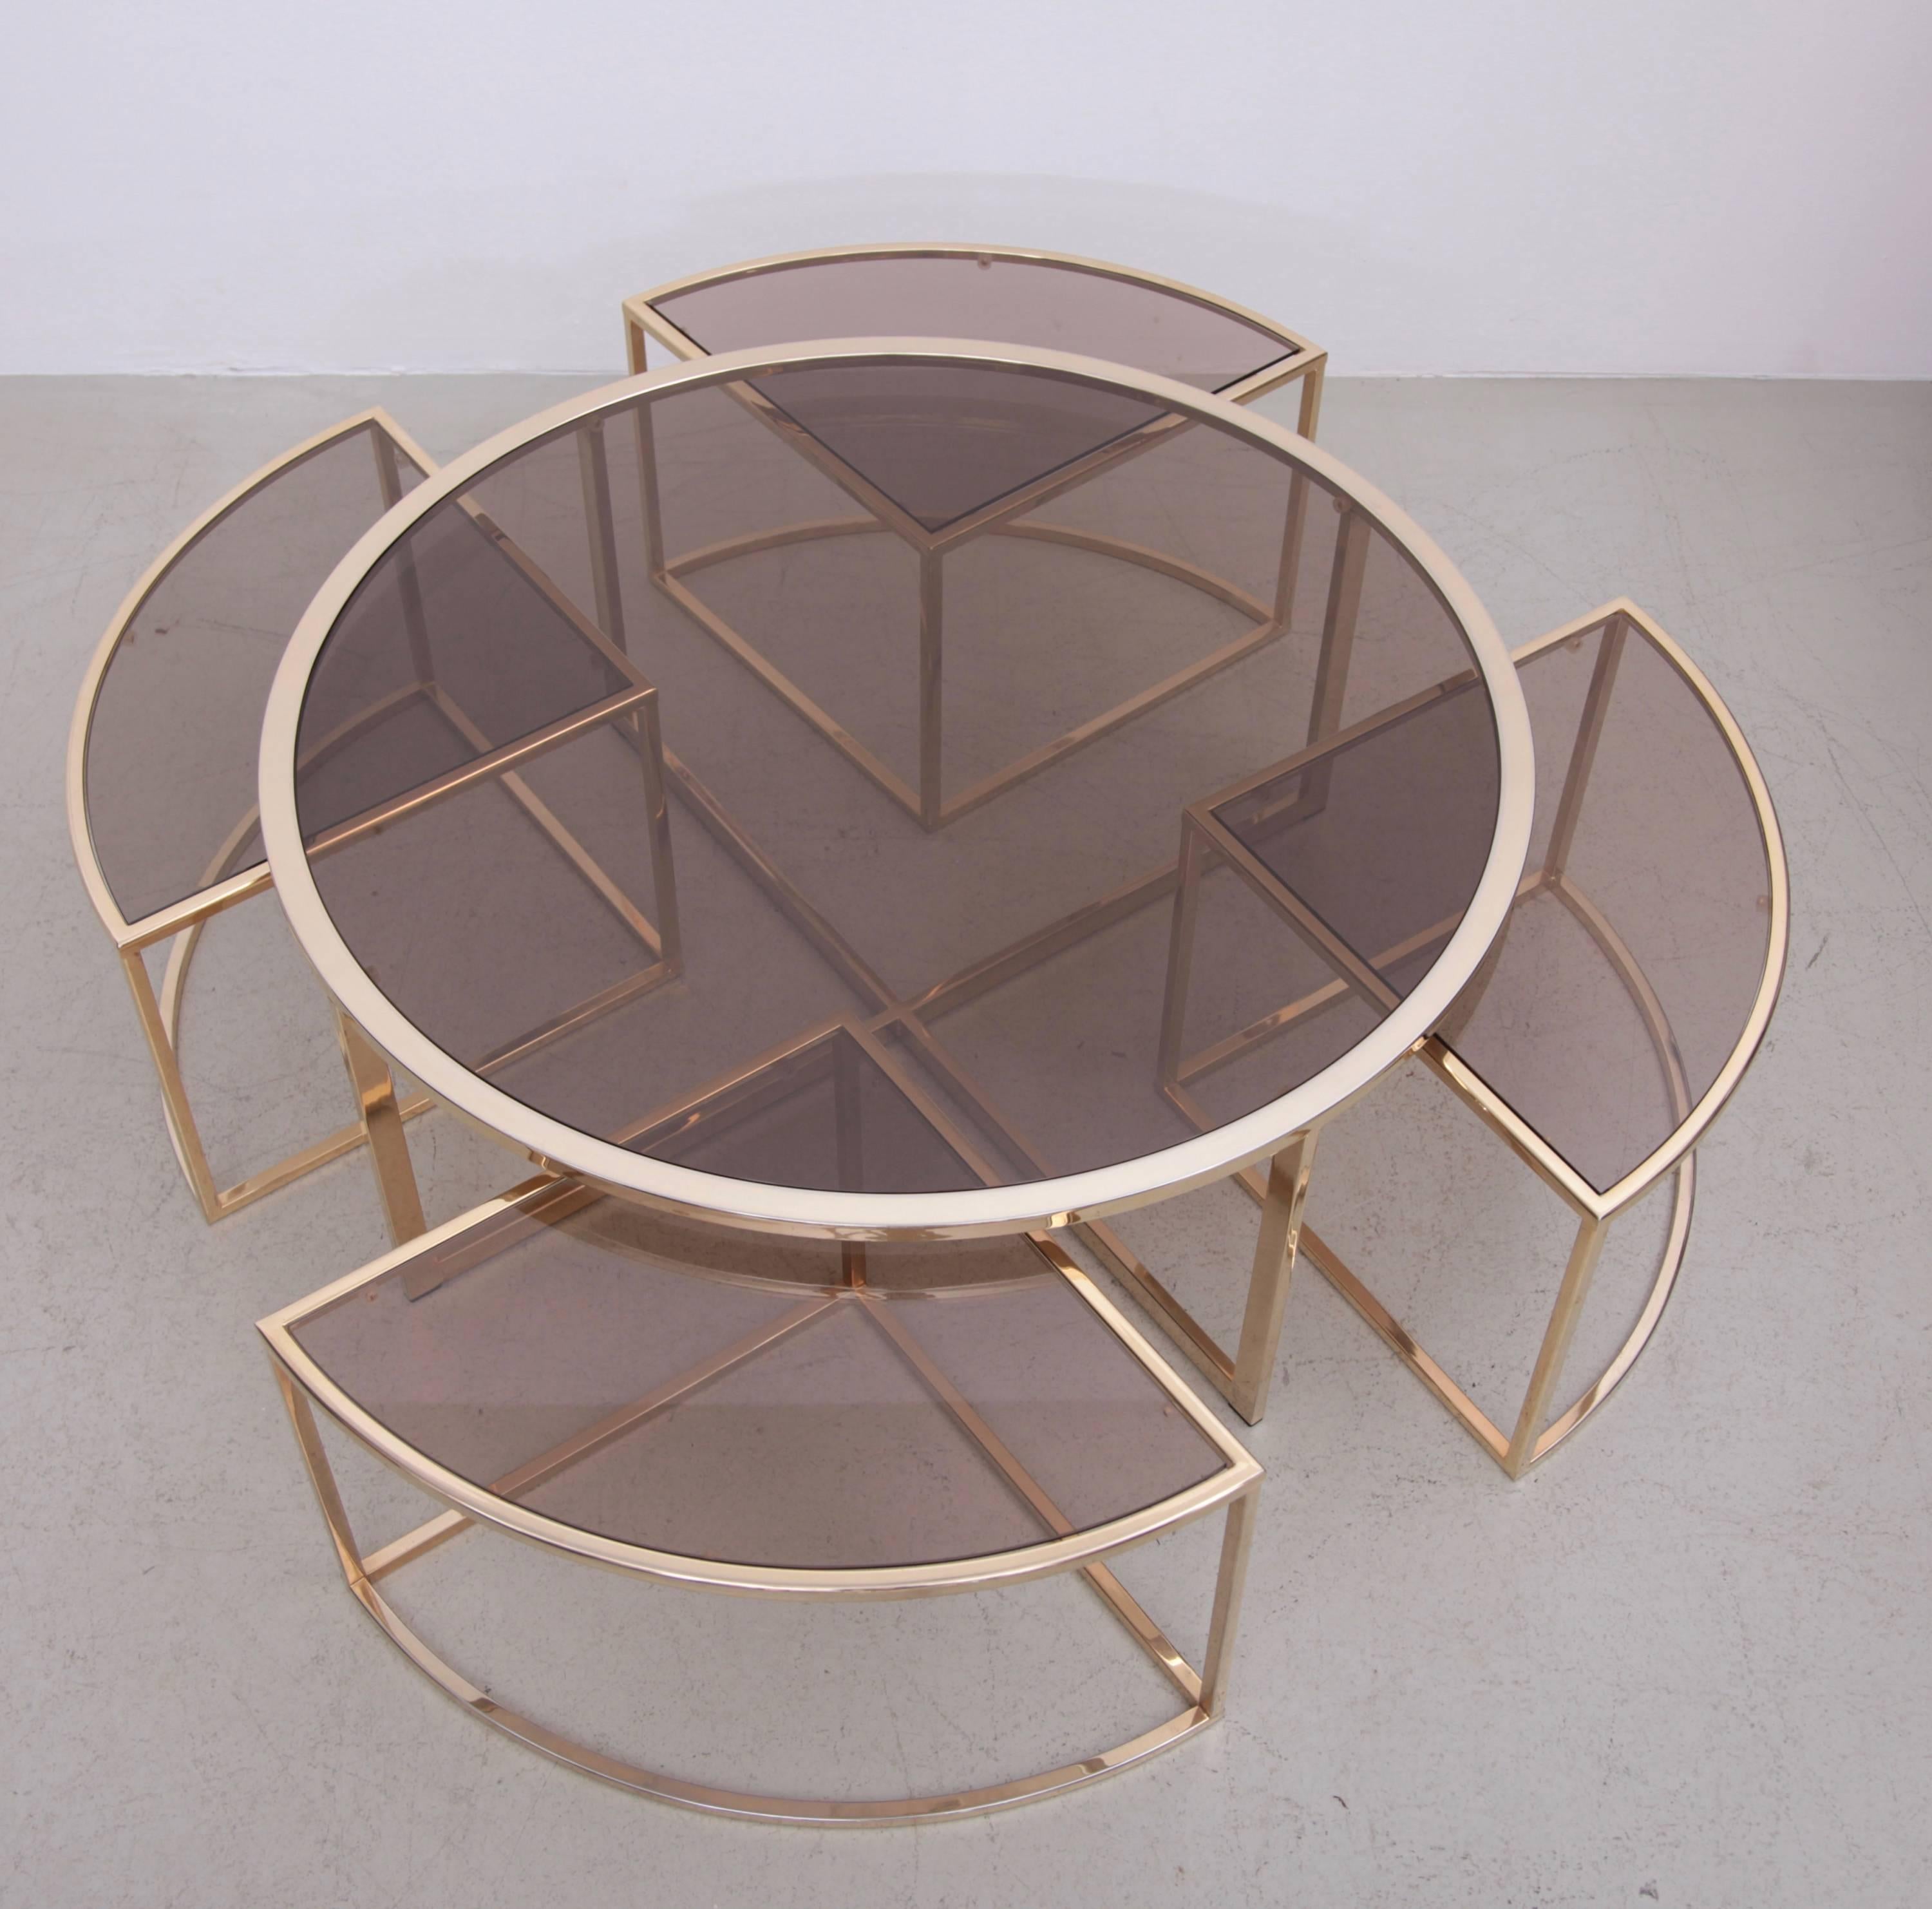 Rare round brass coffee table with four nesting tables by Maison Charles. The glass plates are loosely inserted to create the table surfaces. Excellent condition with tiny glass chips.